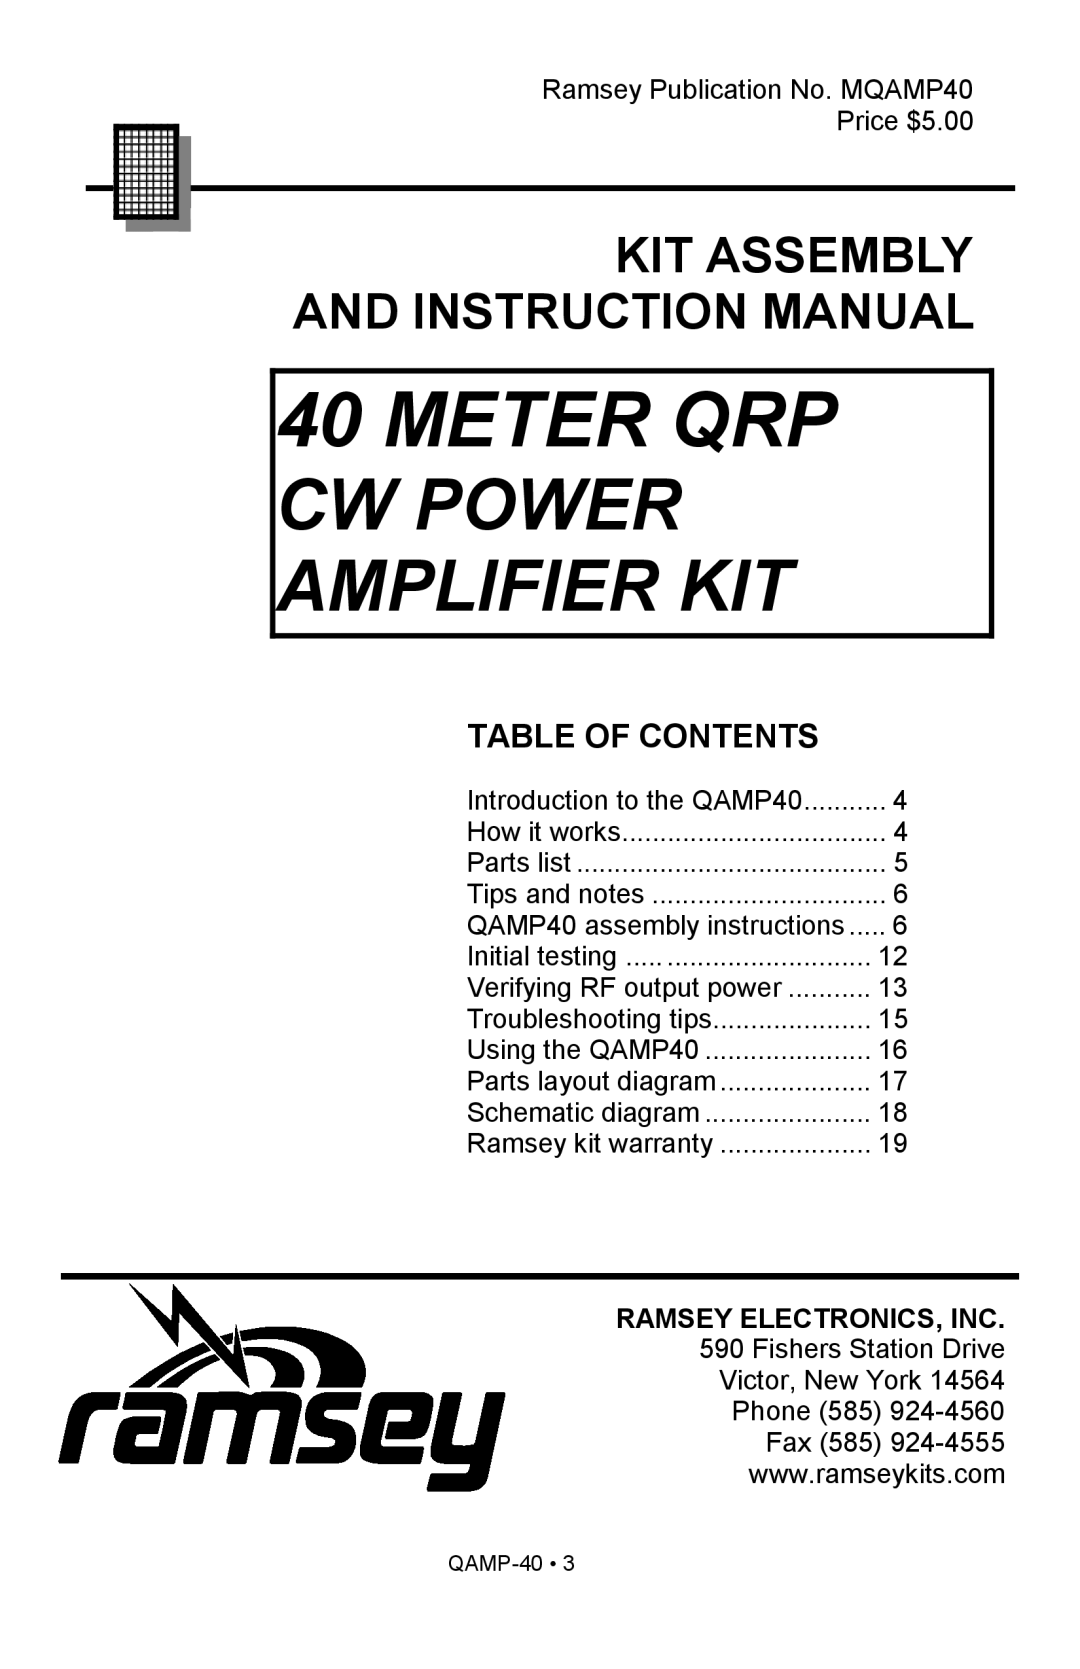 Ramsey Electronics QAMP40 manual Meter Qrp, Cw Power, Amplifier Kit, Table Of Contents 